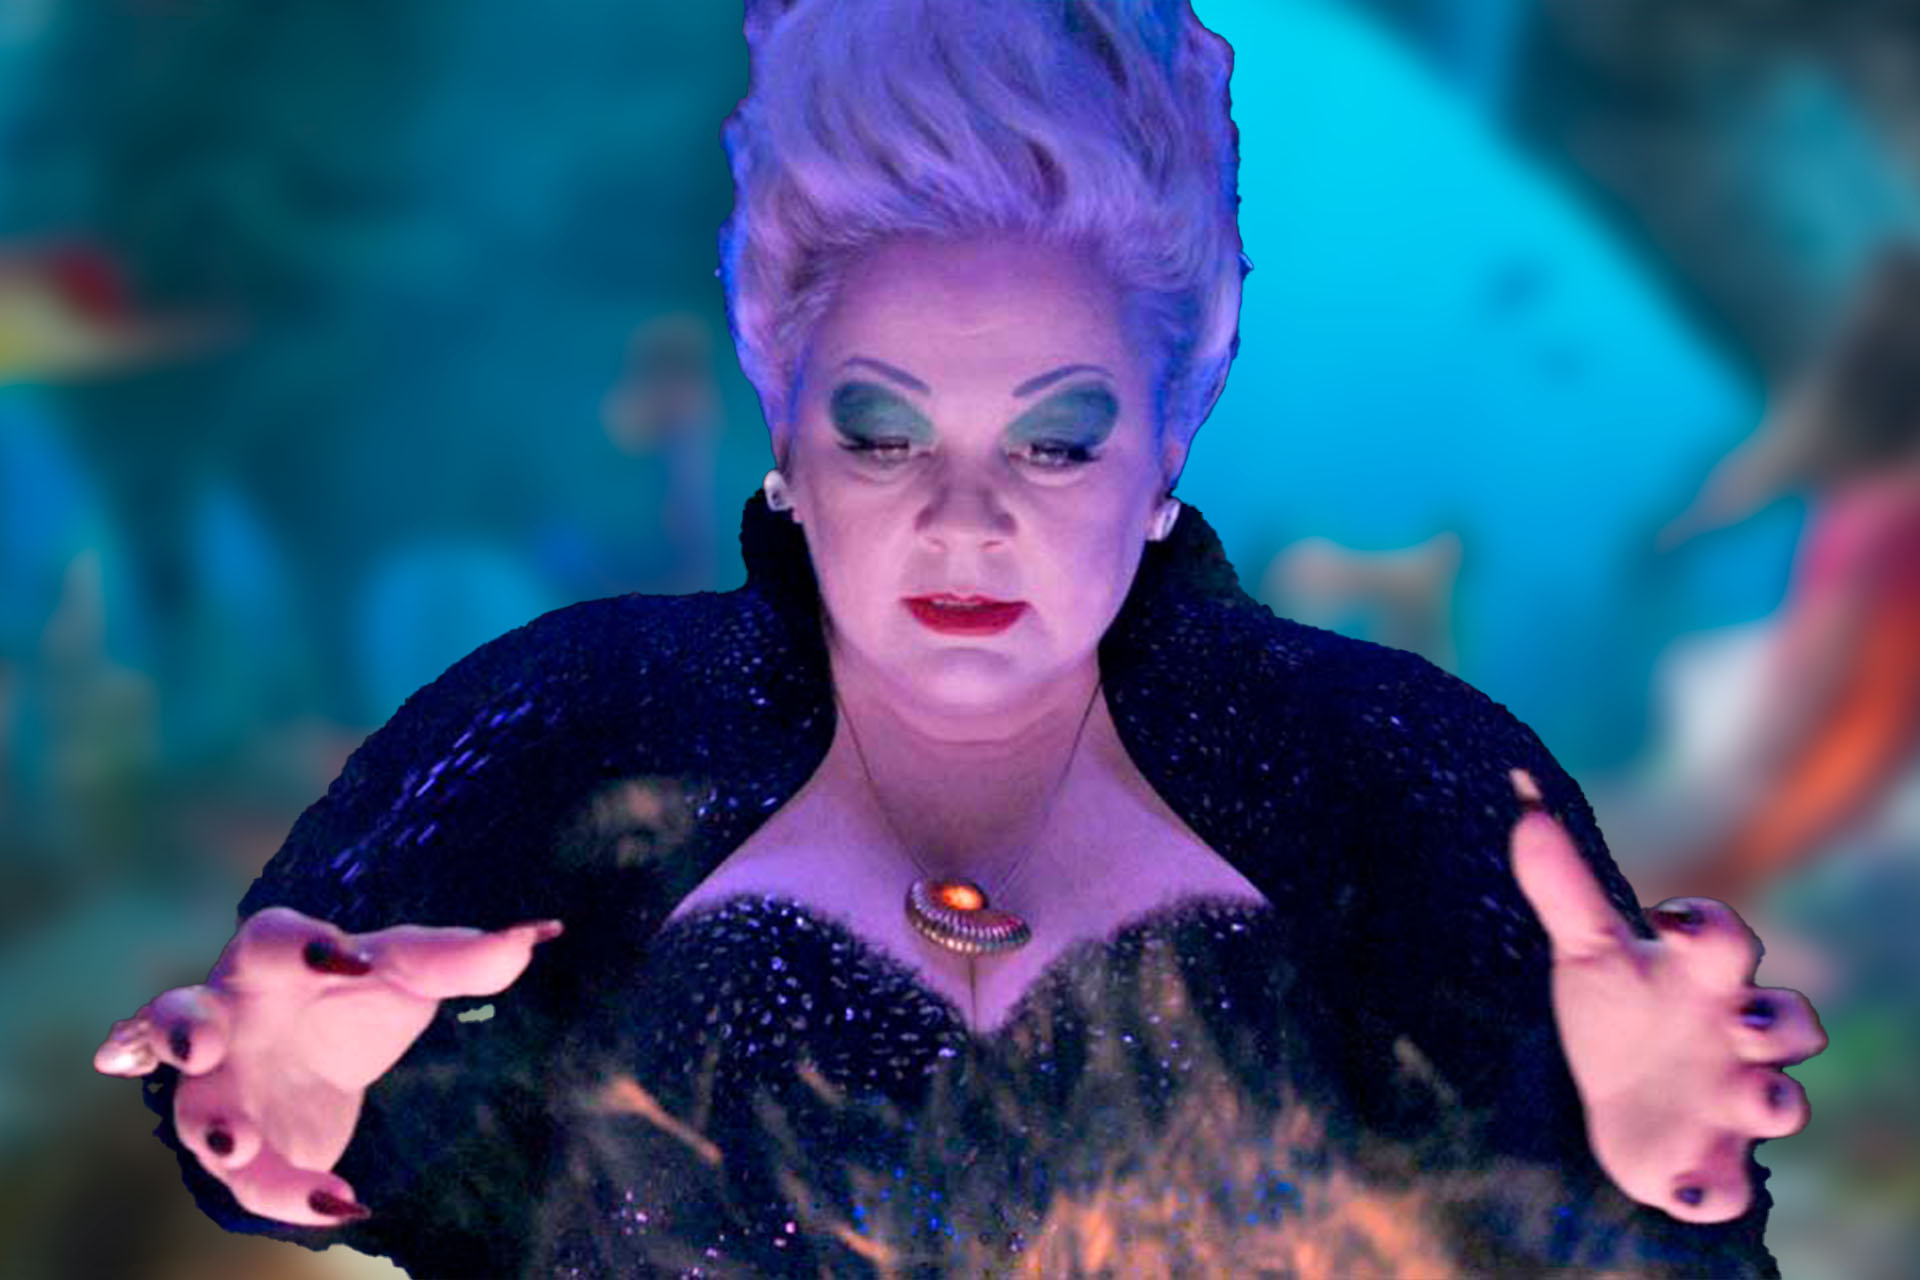 The Little Mermaid’s Ursula’s Horrible Makeup, Finally Explained